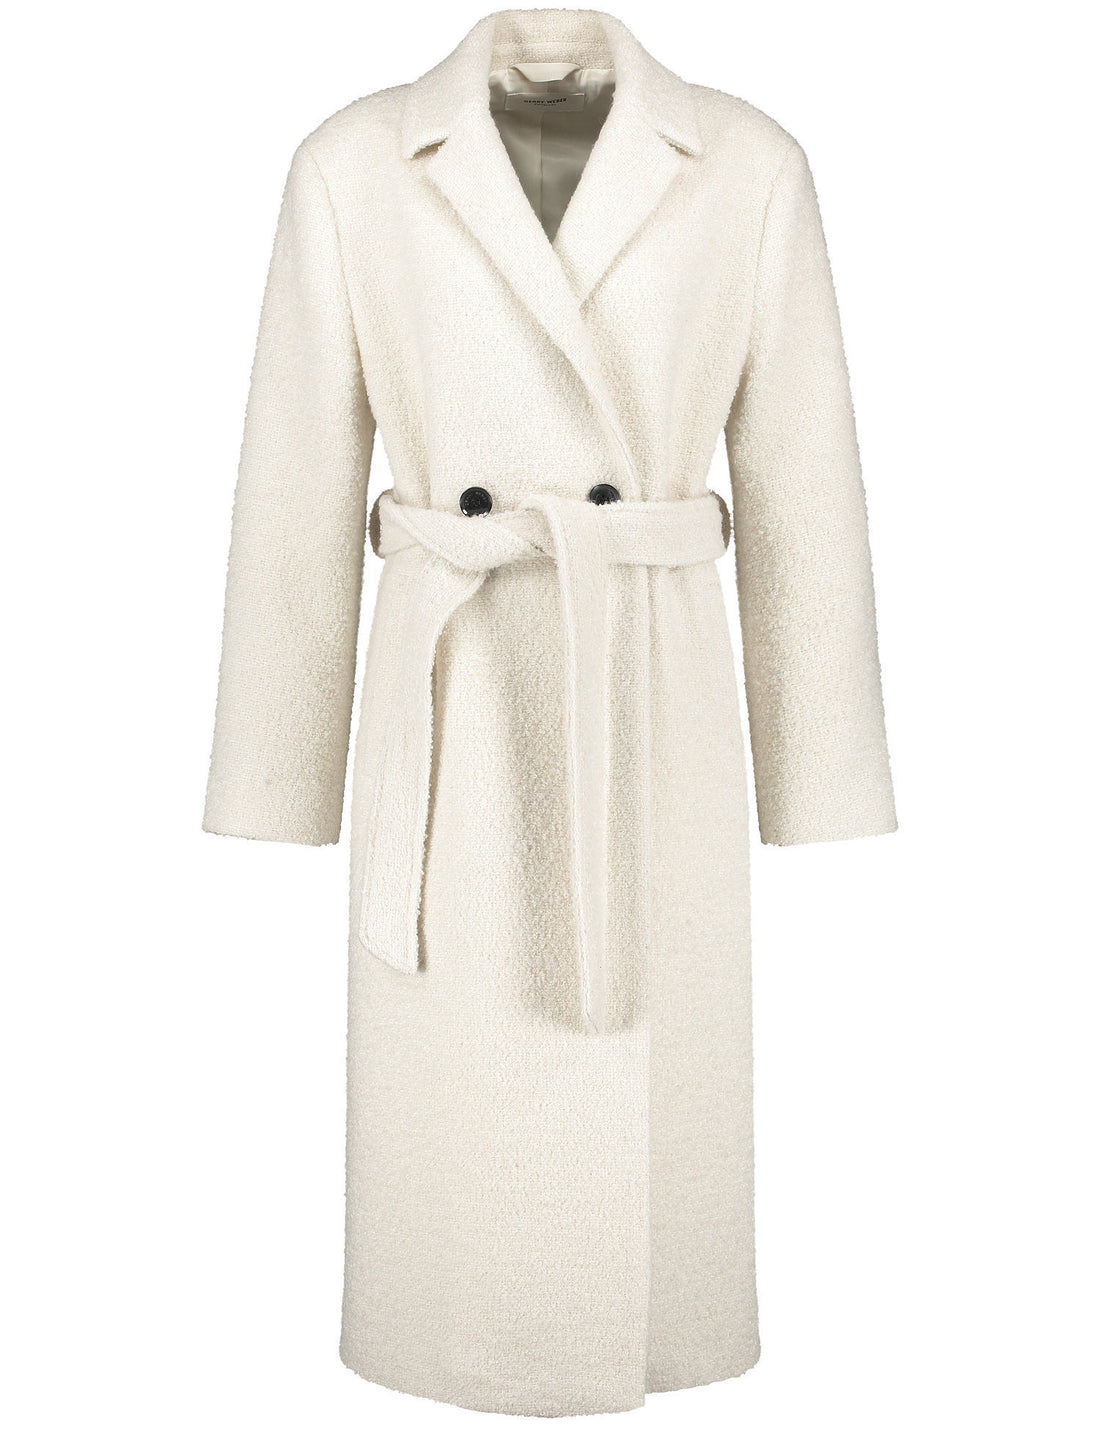 Wool Coat With A Bouclé Finish_250003-31130_99700_02